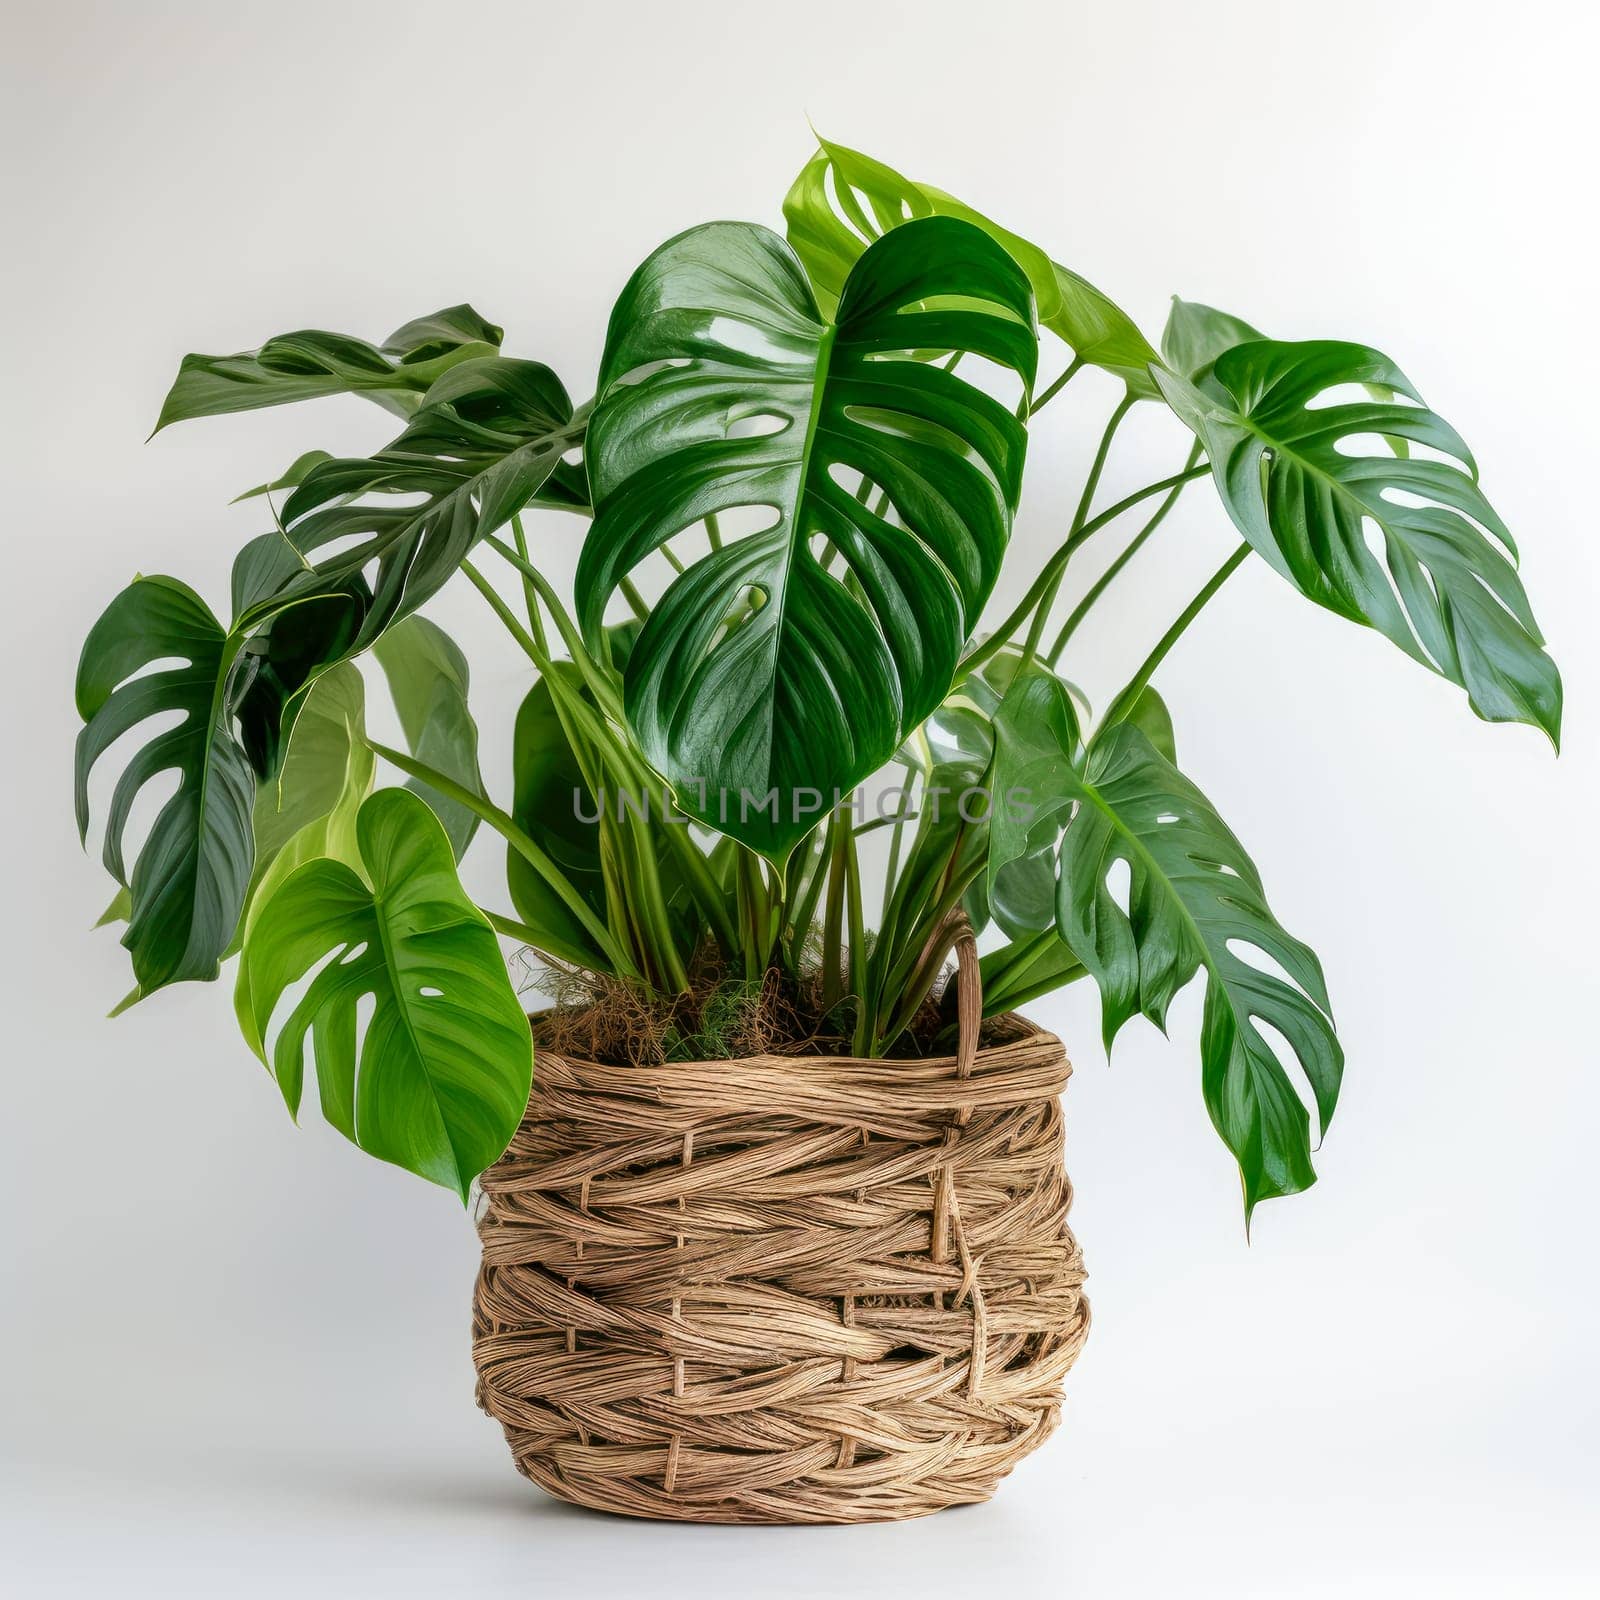 Monstera deliciosa or Swiss Cheese Plant in a woven flower pot, on a bright background by Ramanouskaya